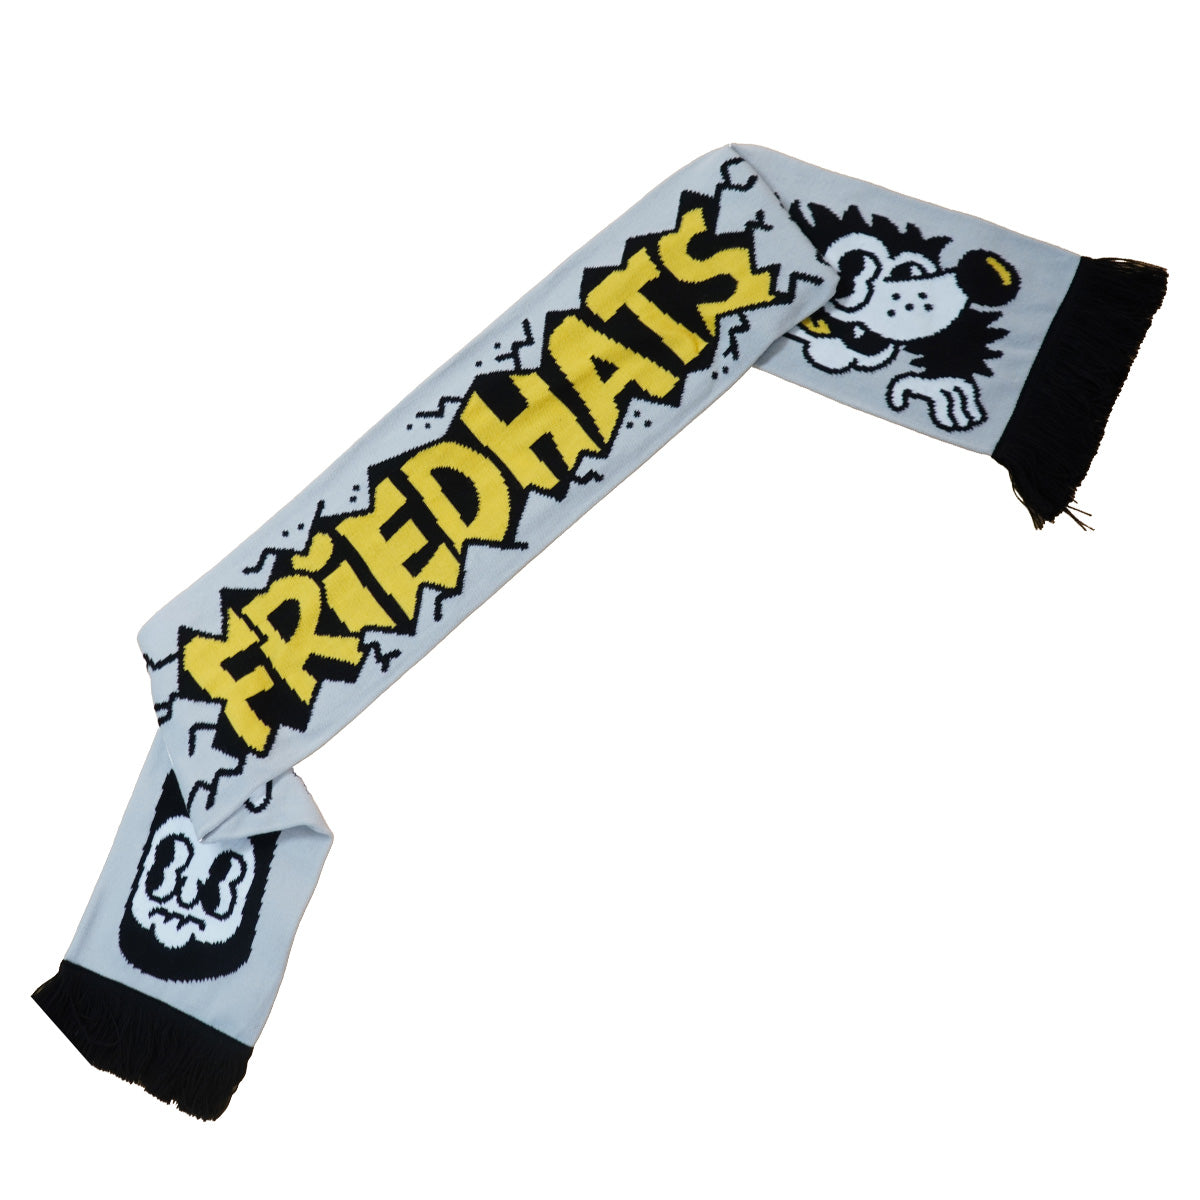 Friedhats Scarf (the second coming)